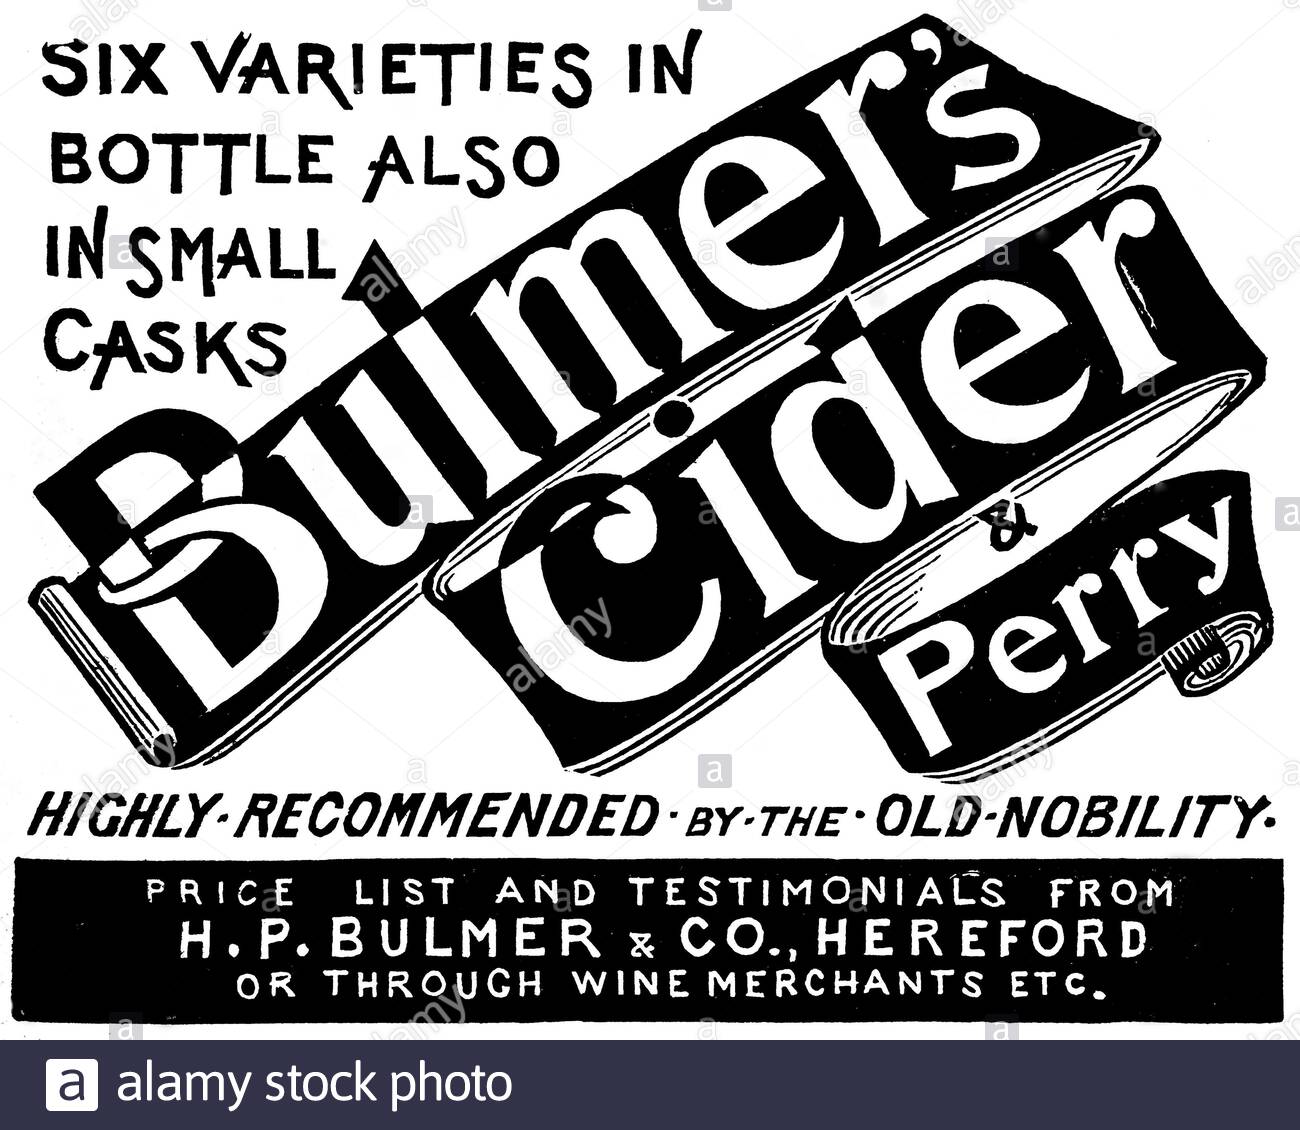 Victorian era, Bulmer's Cider and Perry, vintage advertising from 1896 Stock Photo